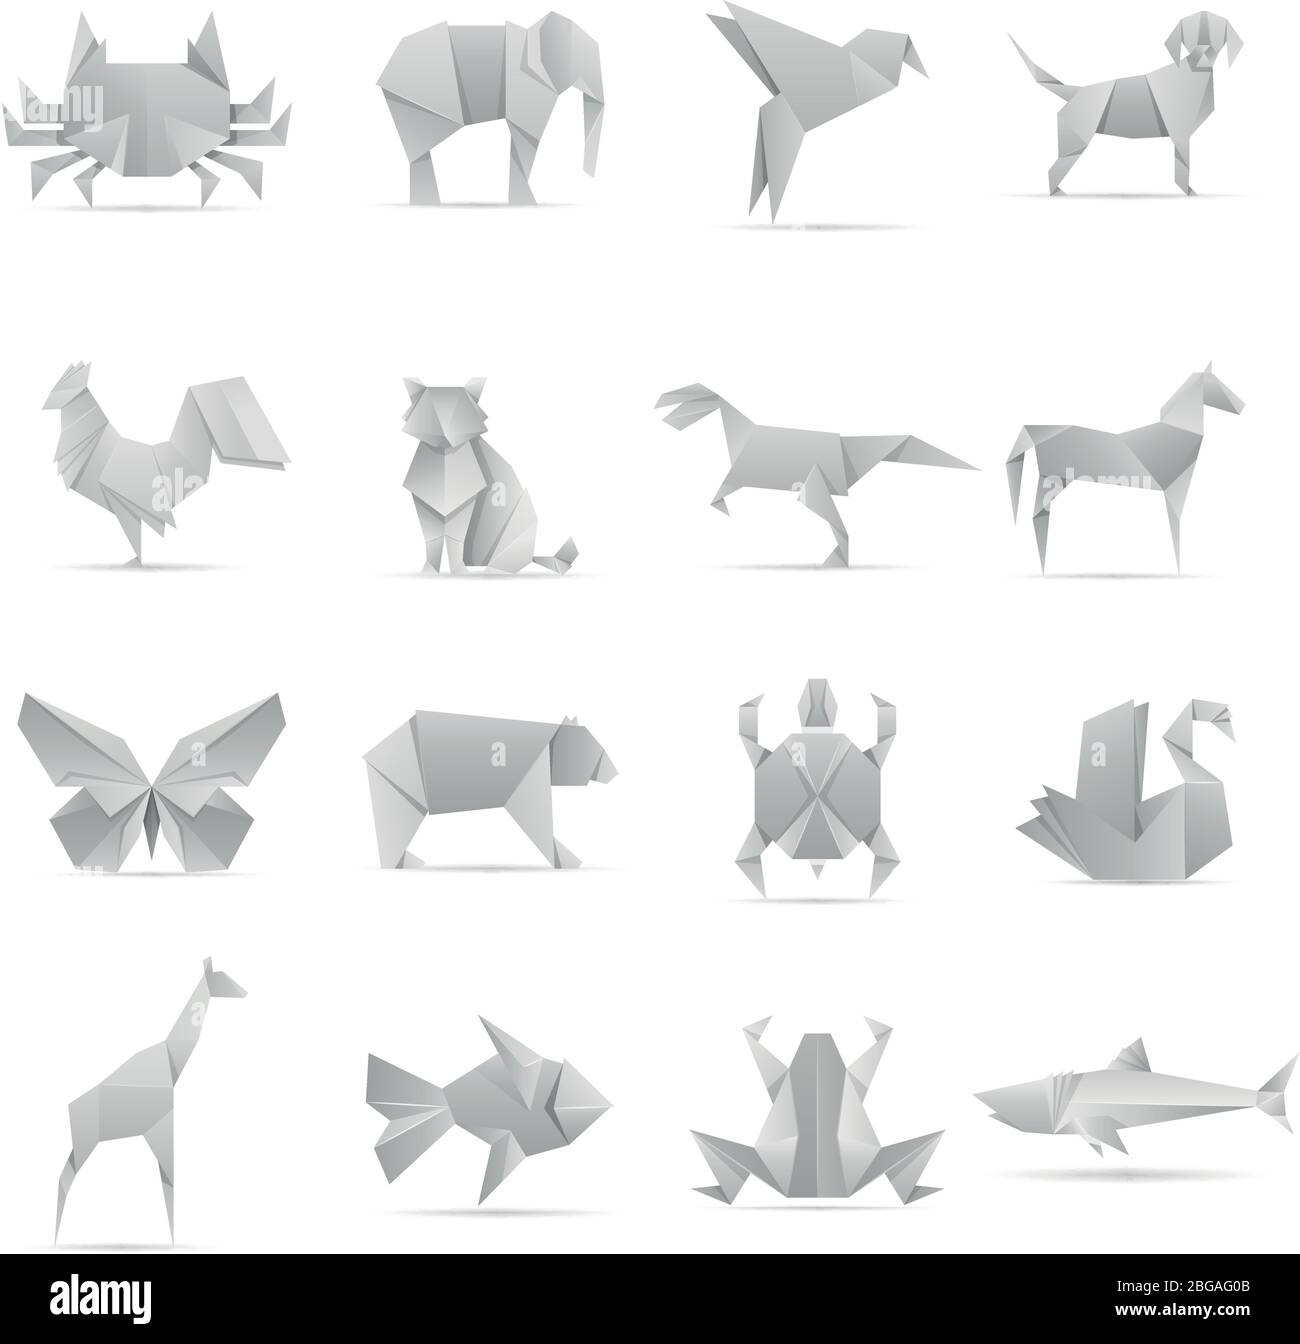 Asian creative origami animals vector collection. Animal geometric toy papers illustration Stock Vector